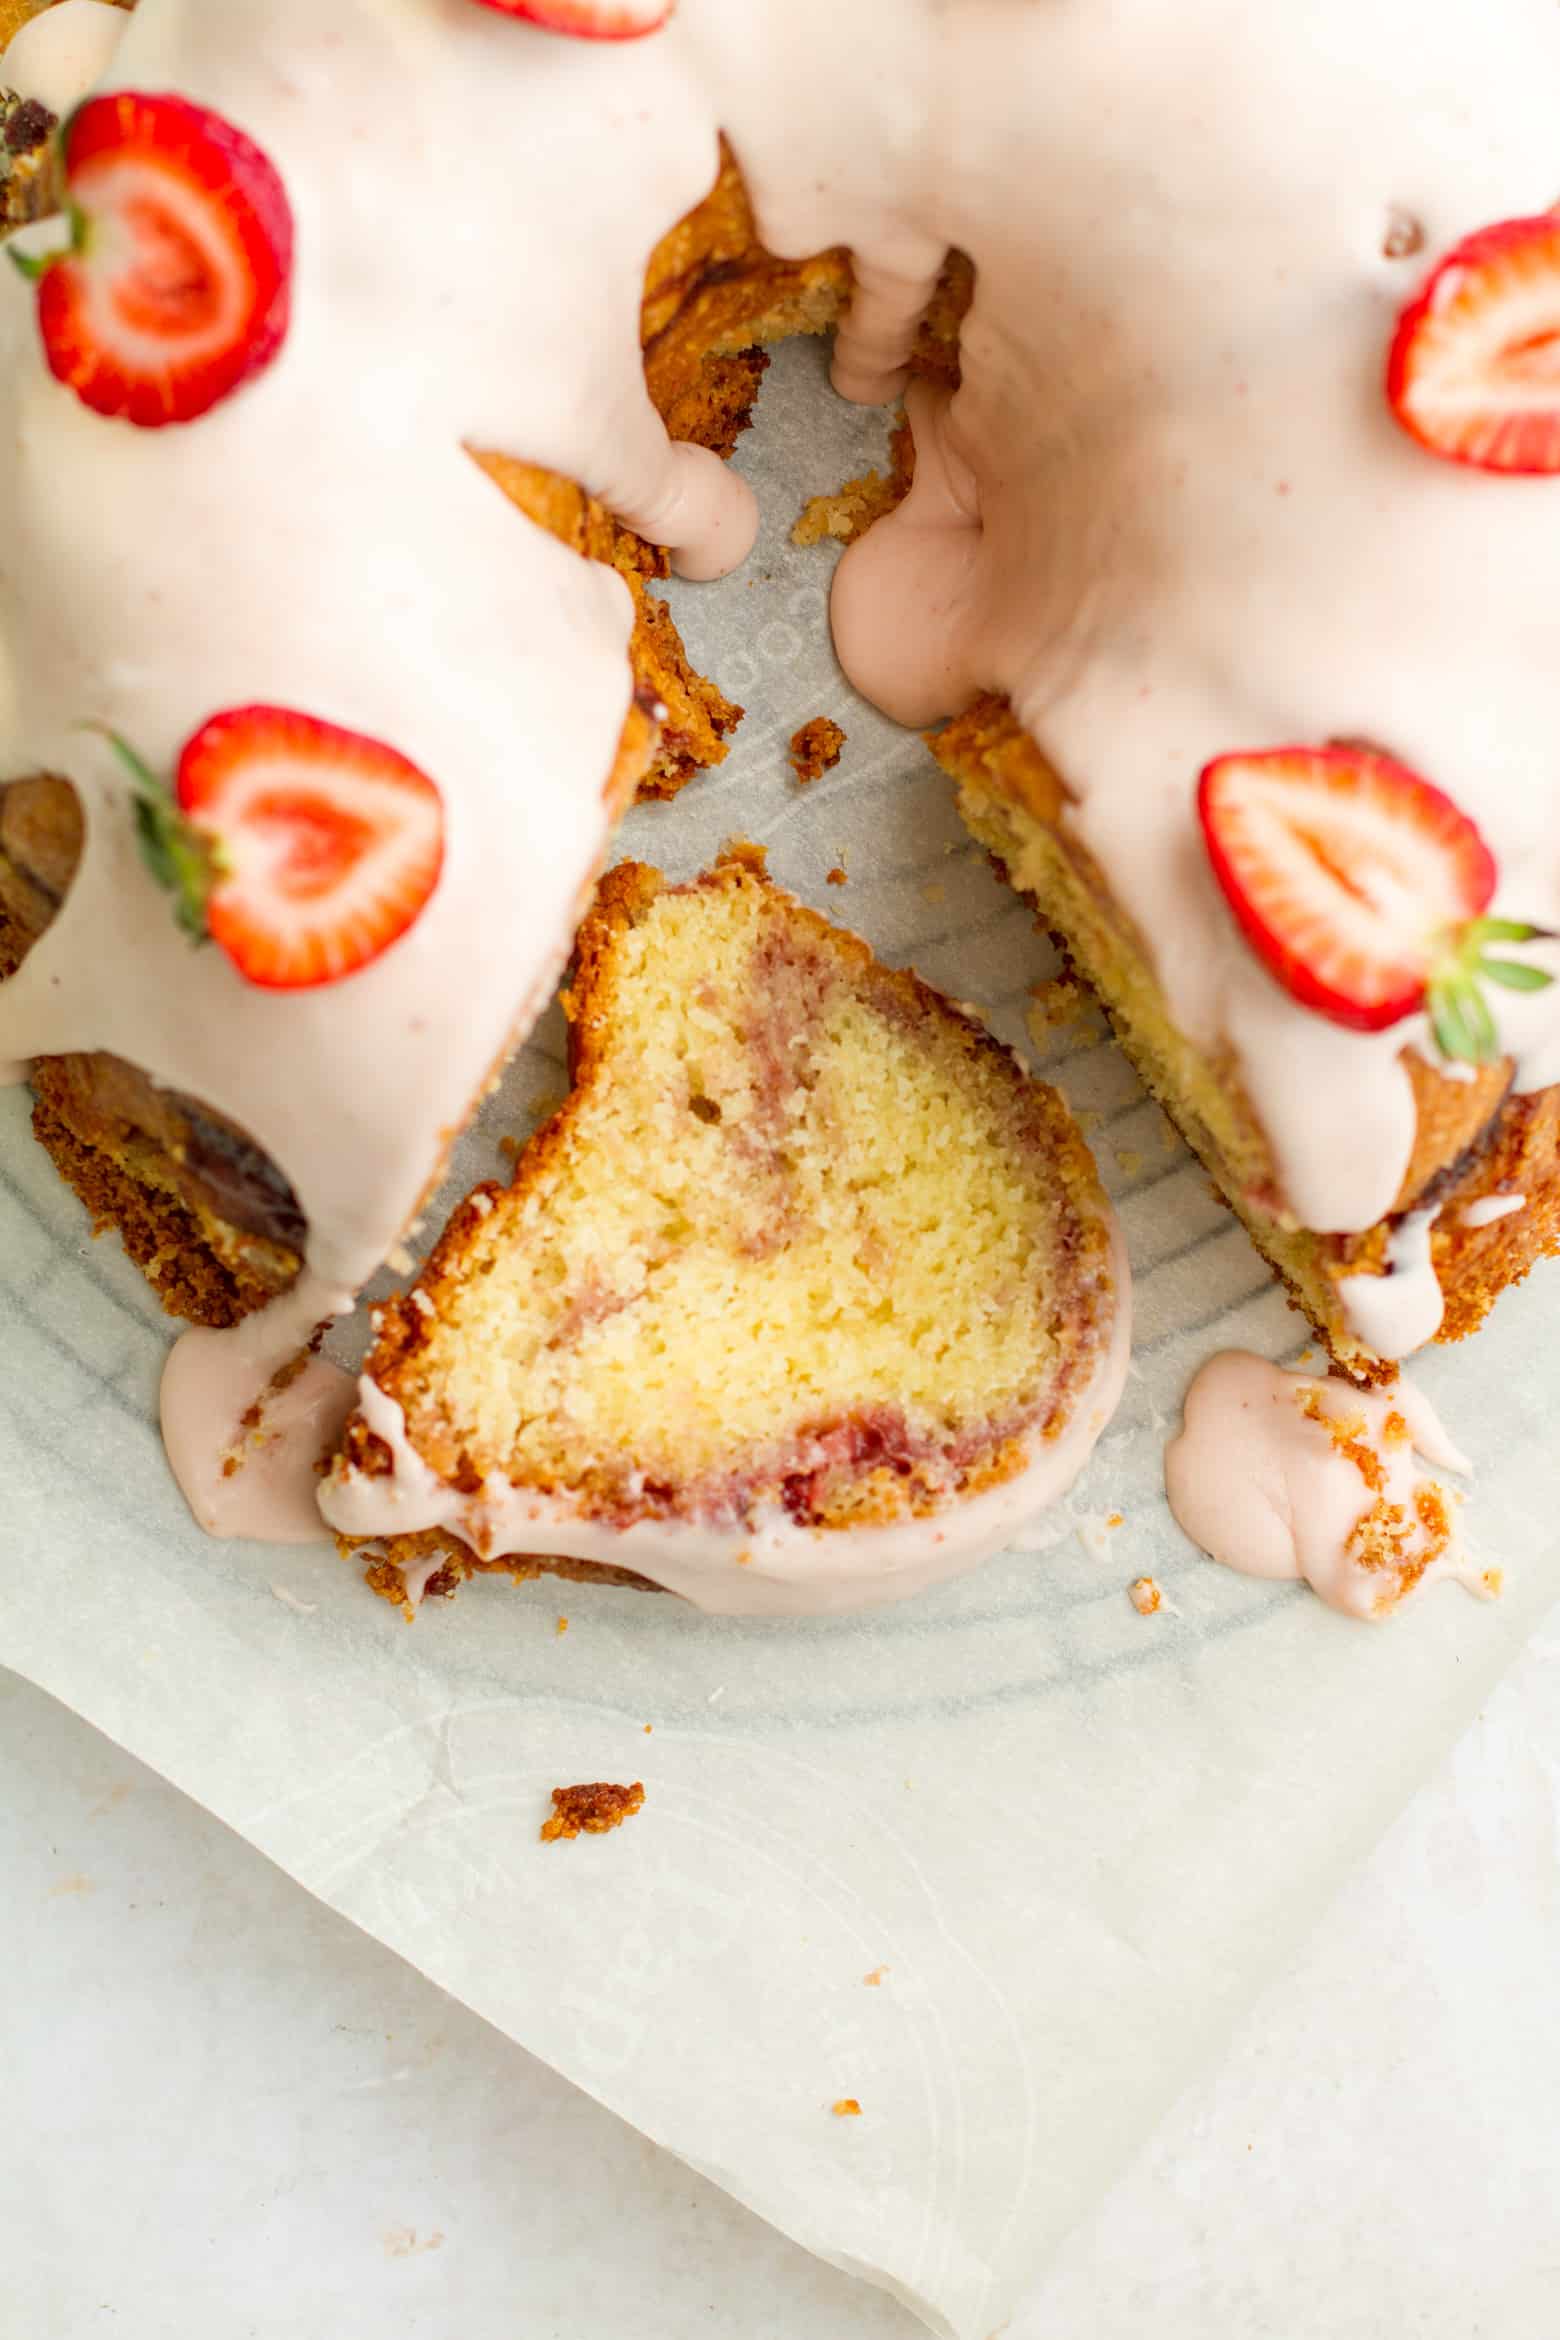 Strawberry pound cake with a slice laying next to it.